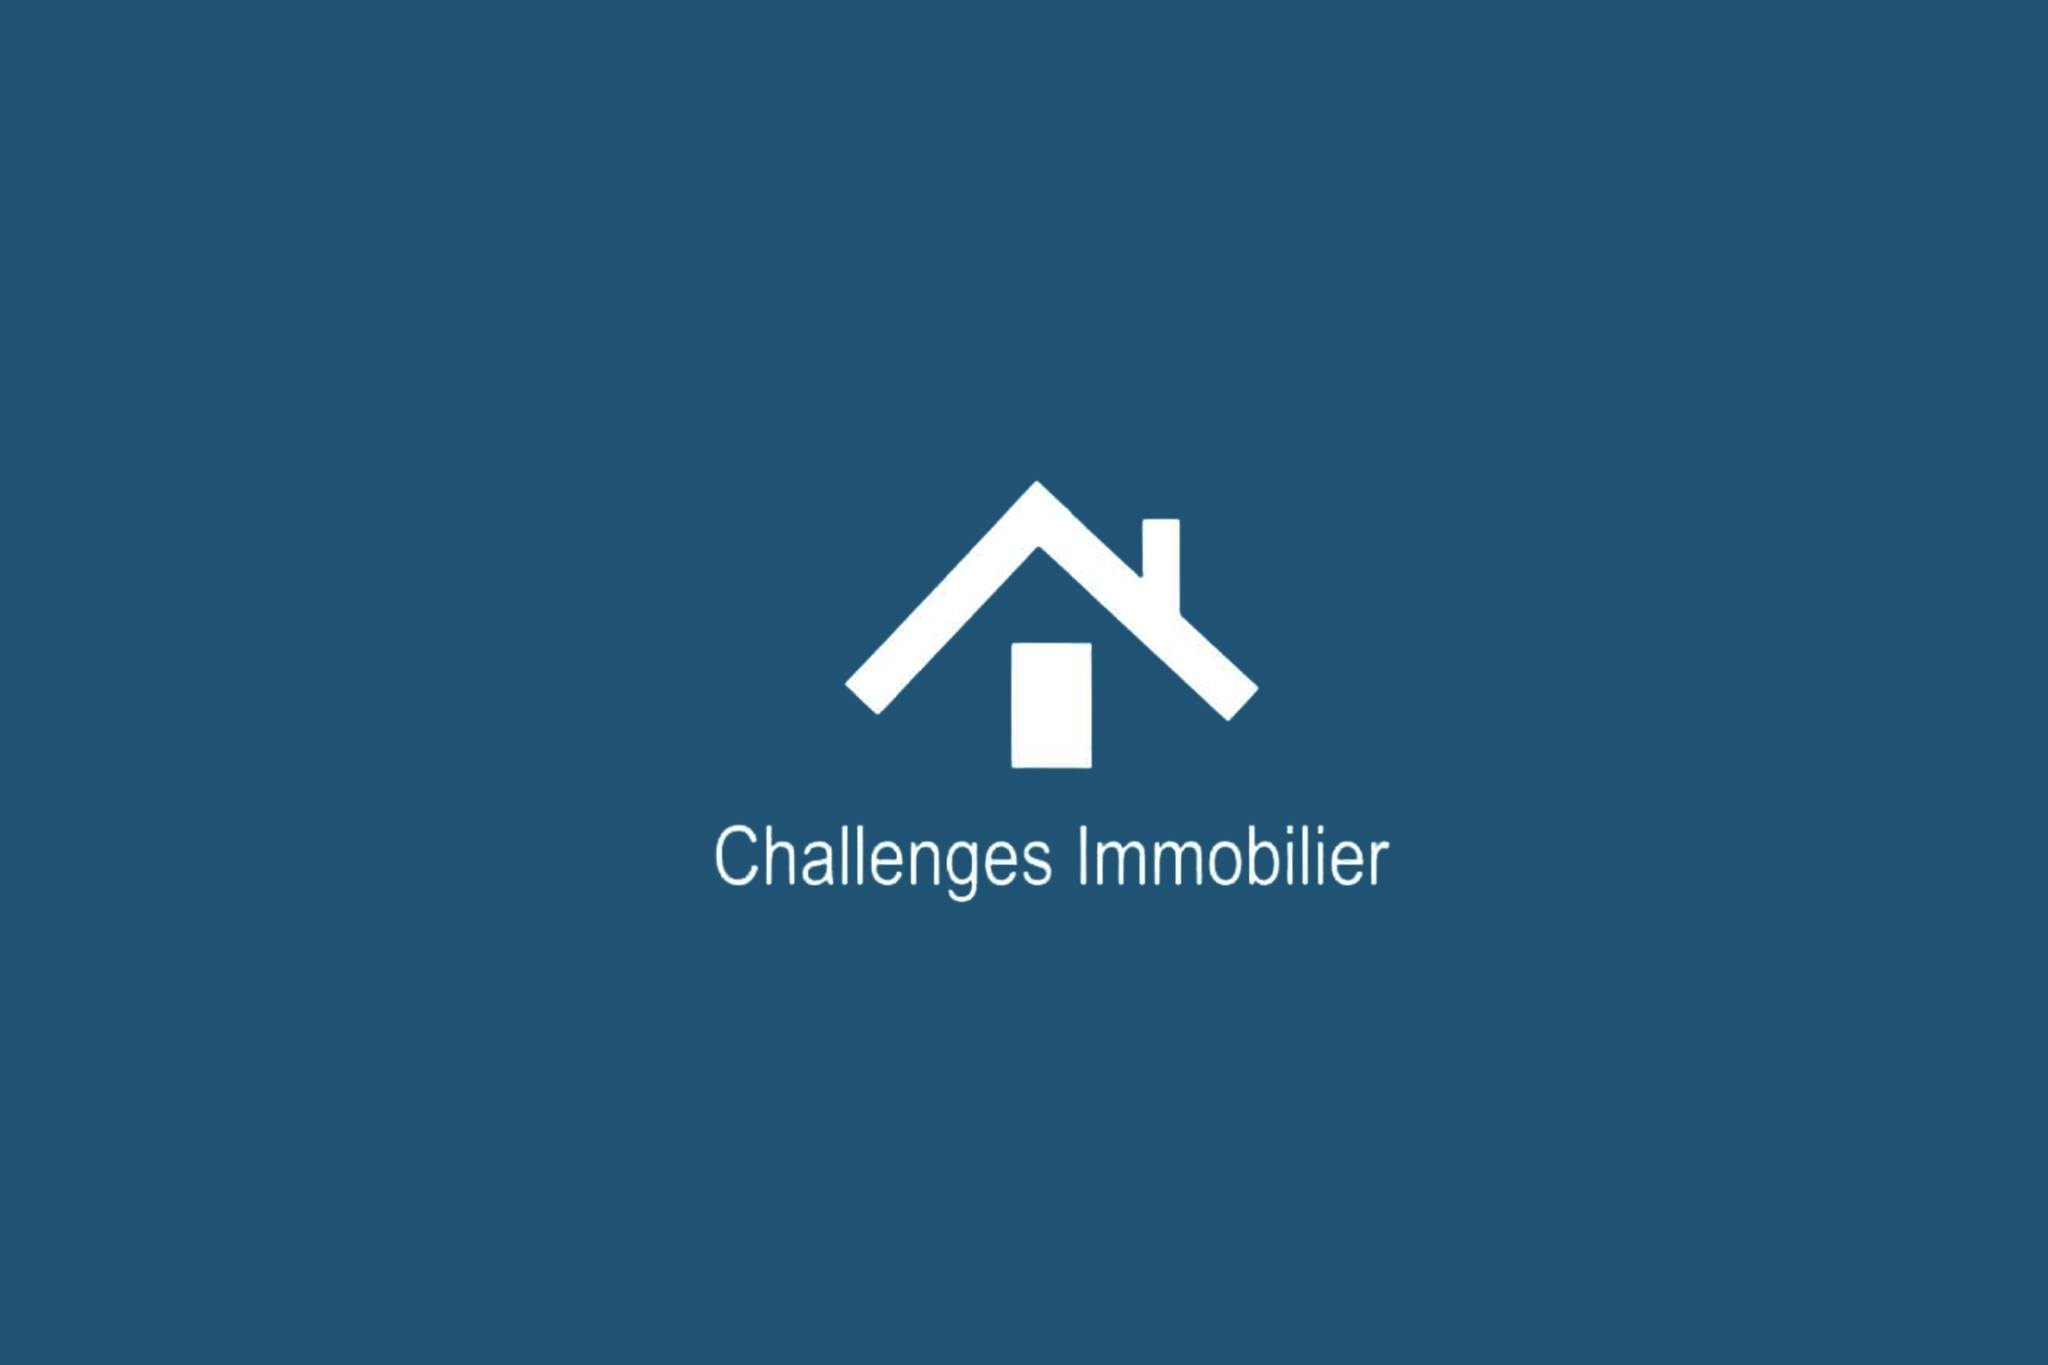 Challenges Immobilier